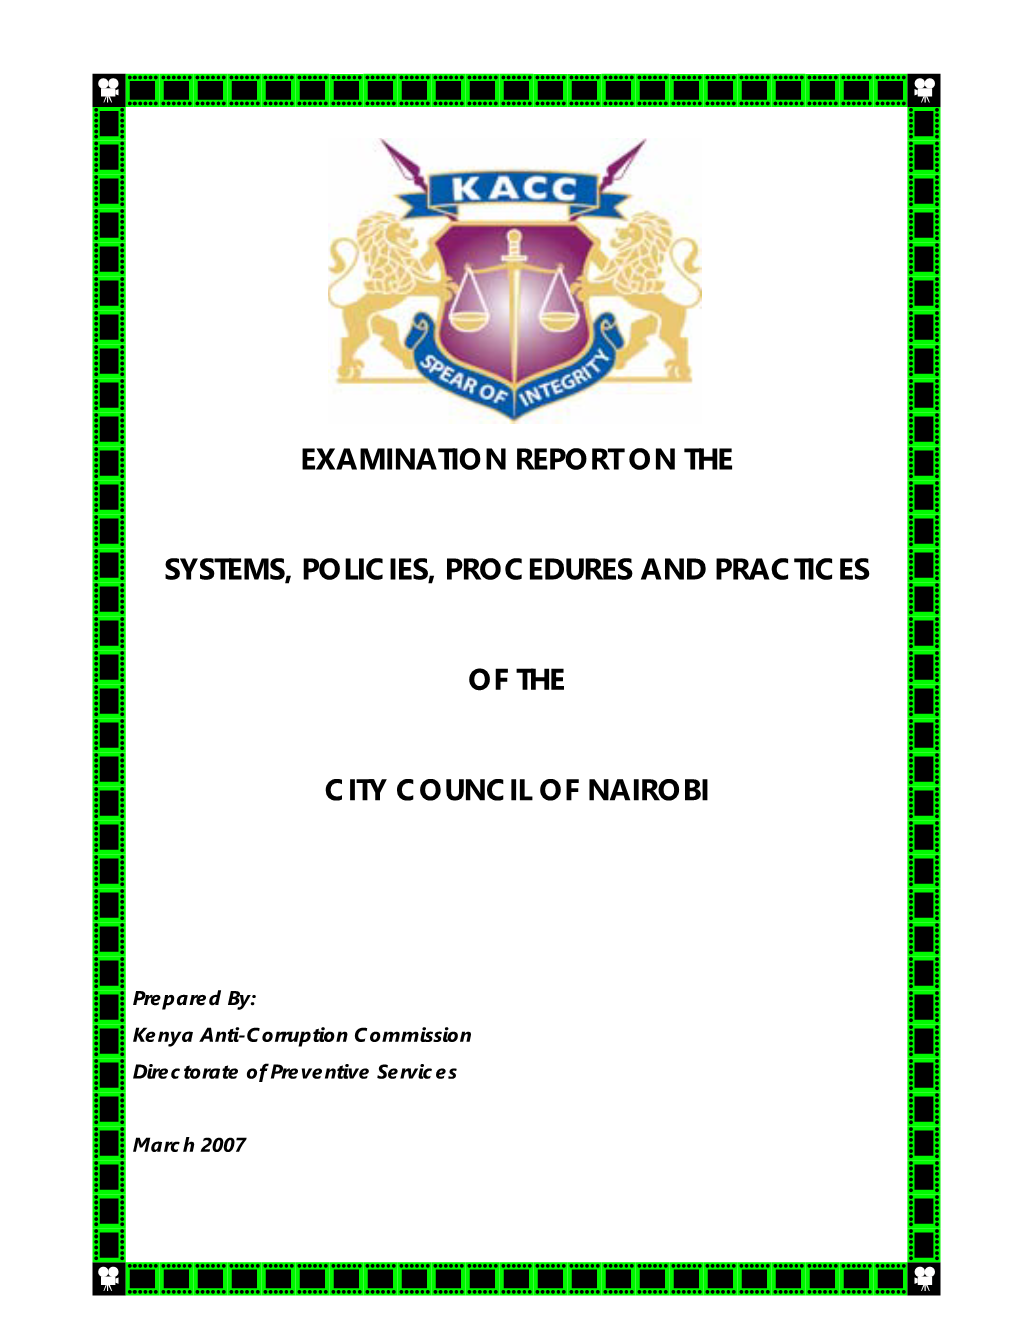 Examination Report on the Systems, Policies, Procedures & Practices Of